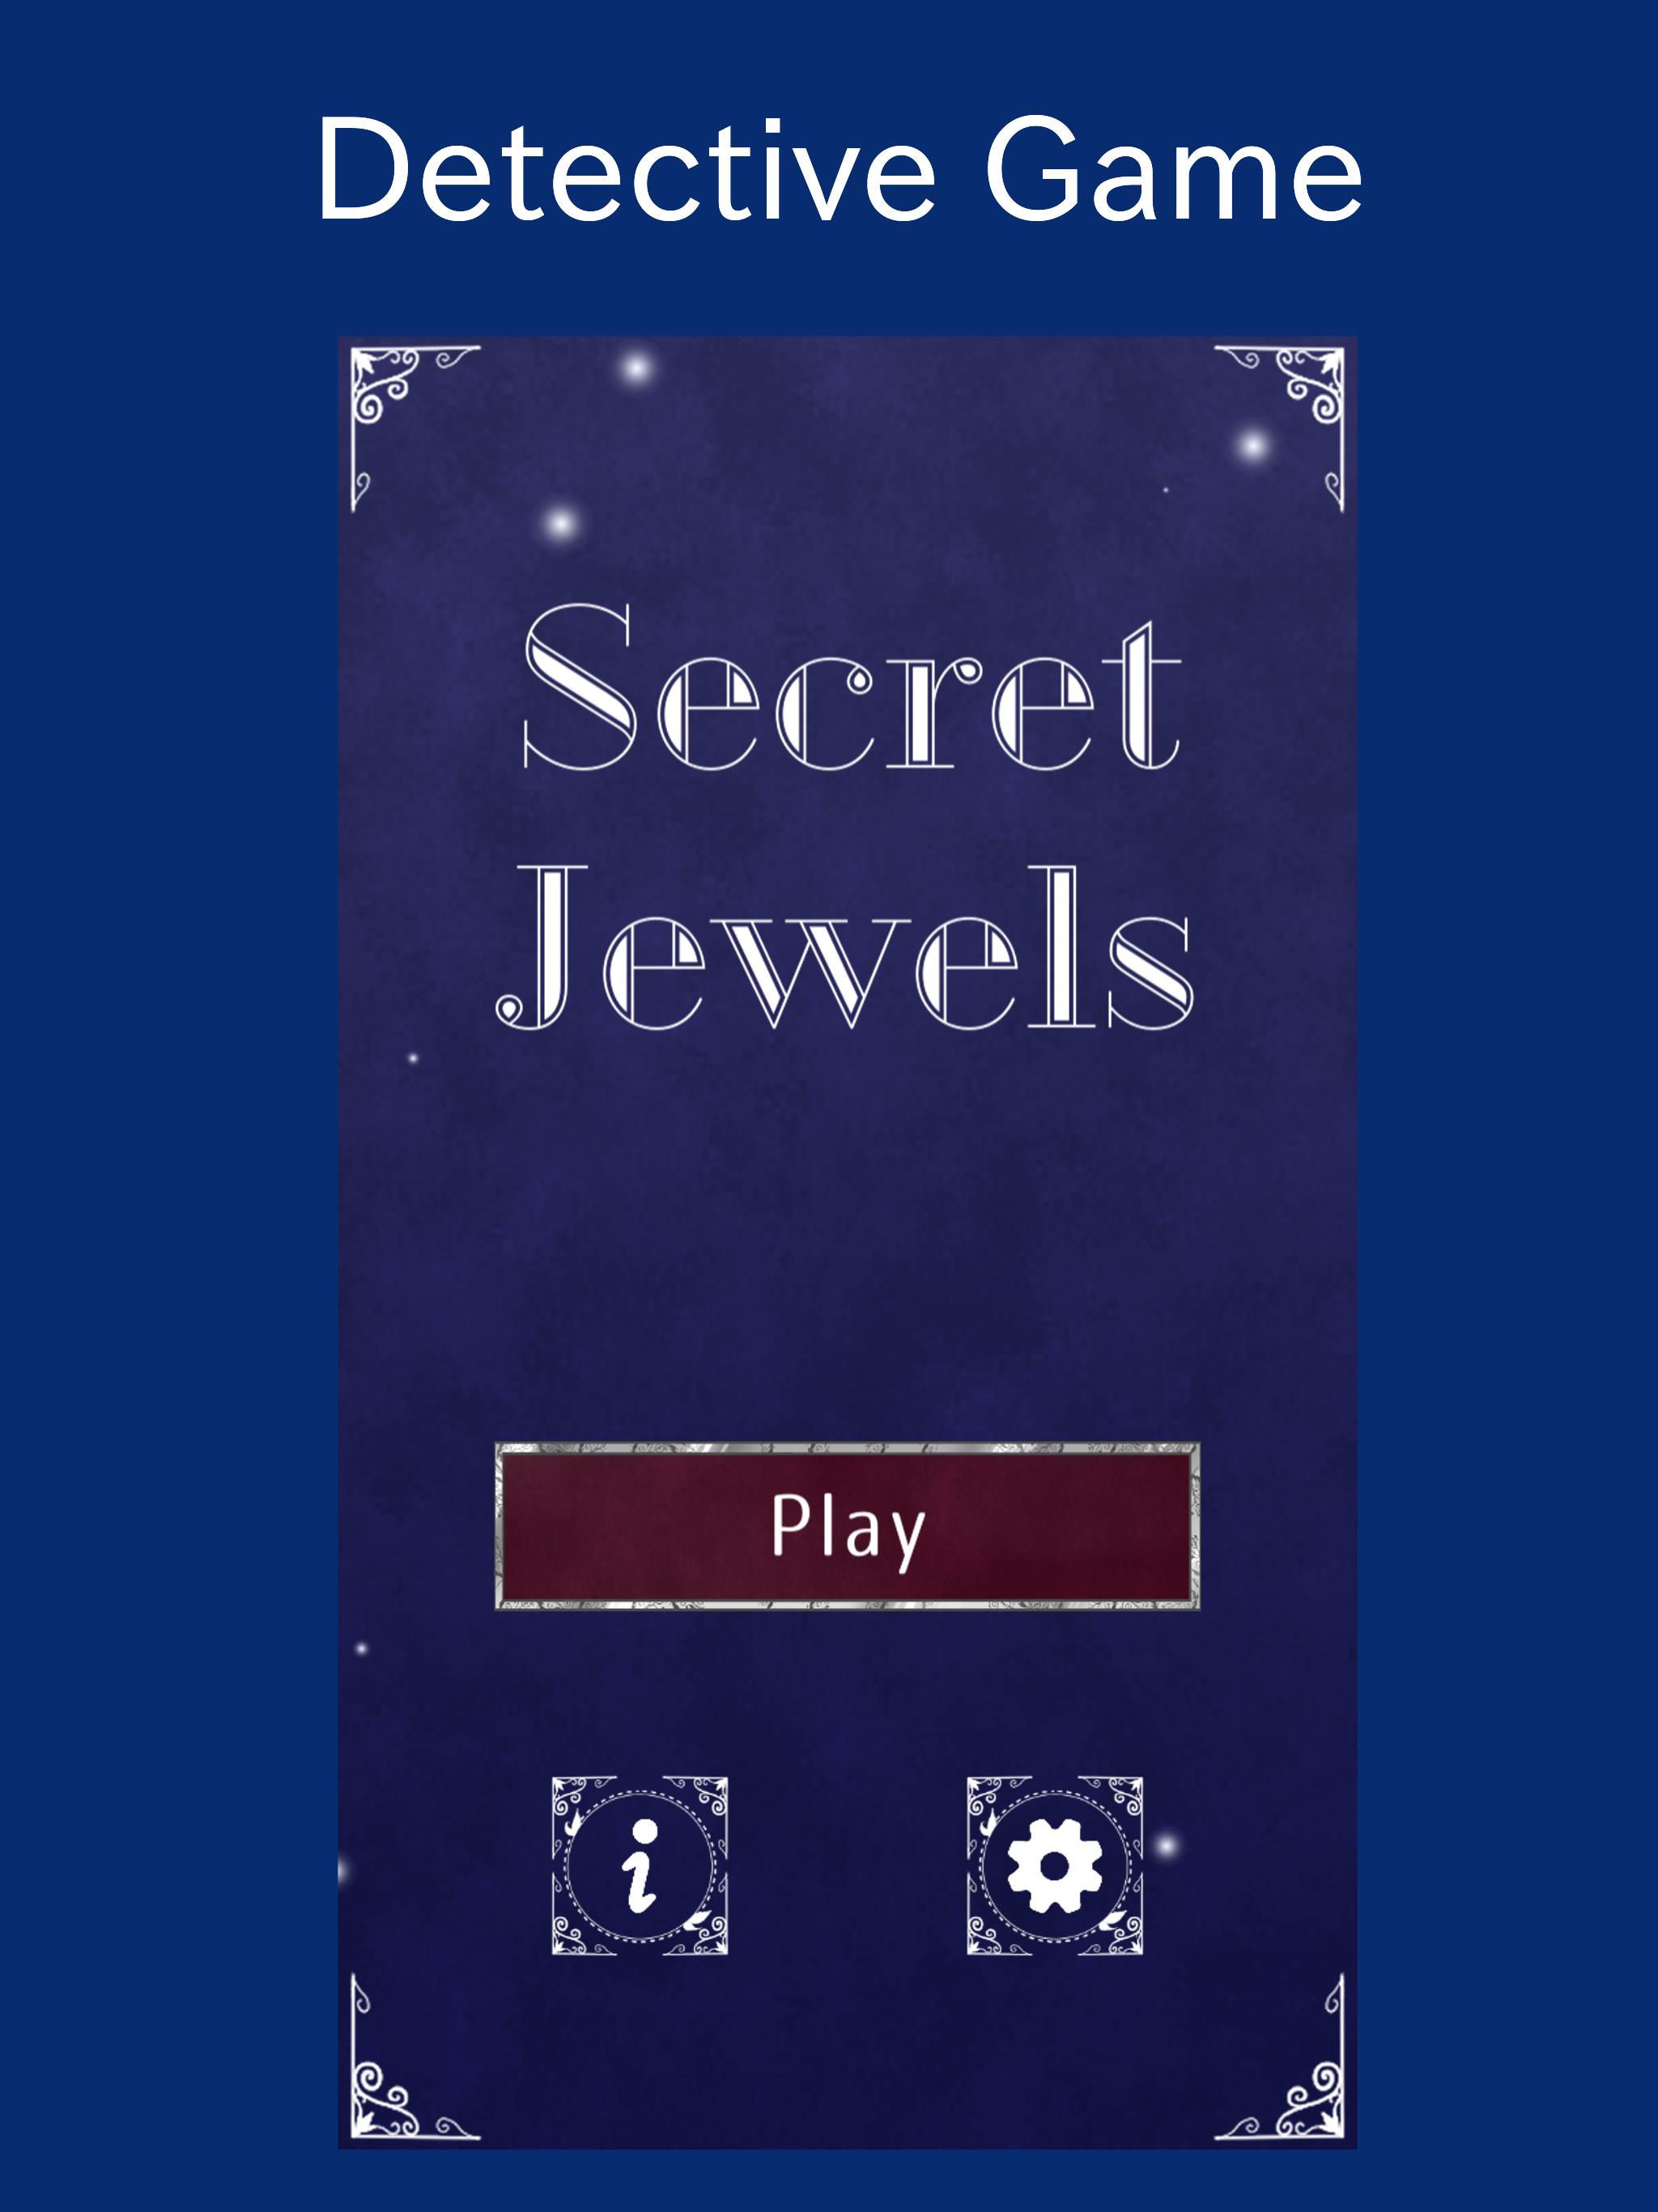 Secret Jewels Hit Blow For Android Apk Download